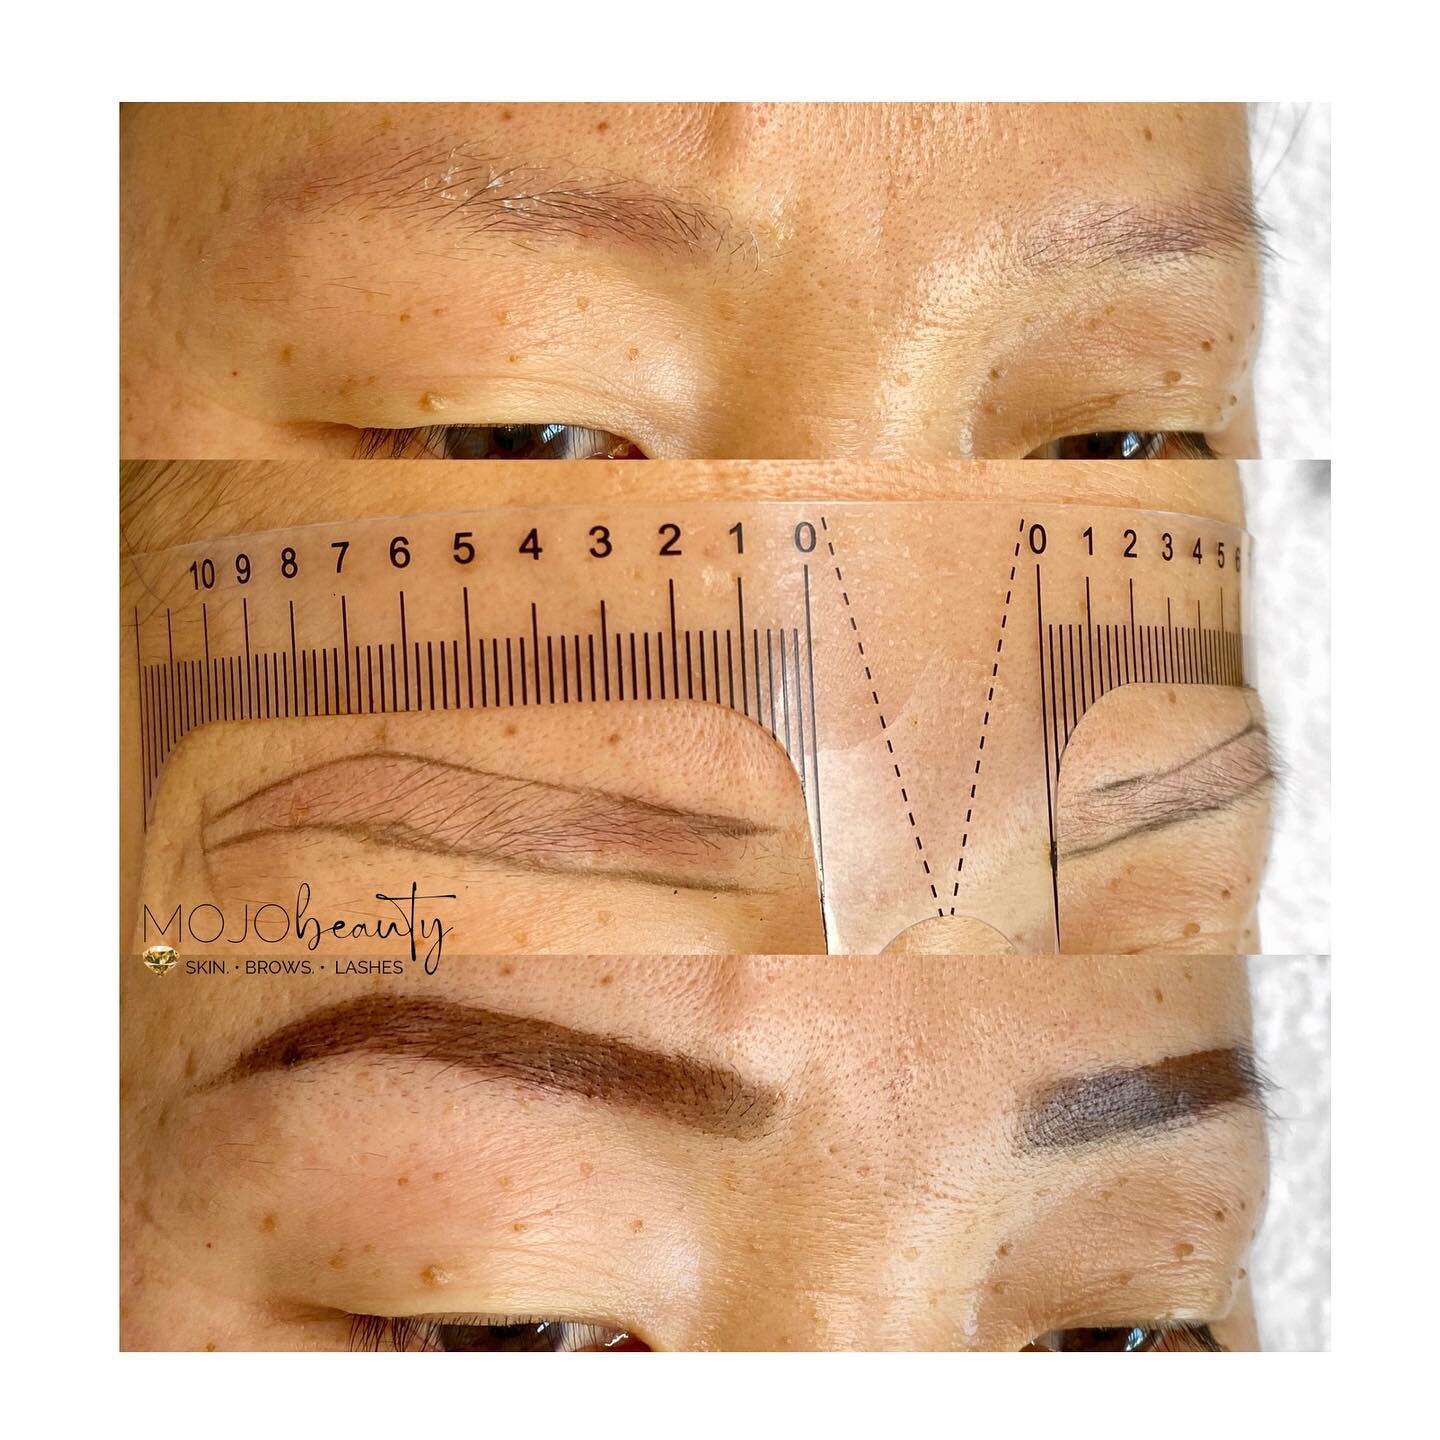 So this is the result of a hybrid brow stain. It lasts on your skin up to 3 weeks &amp; gives you a really great daily visual of what your brows could look like post brow tattoo. And if that is too much to contemplate, you could just stay with the hy